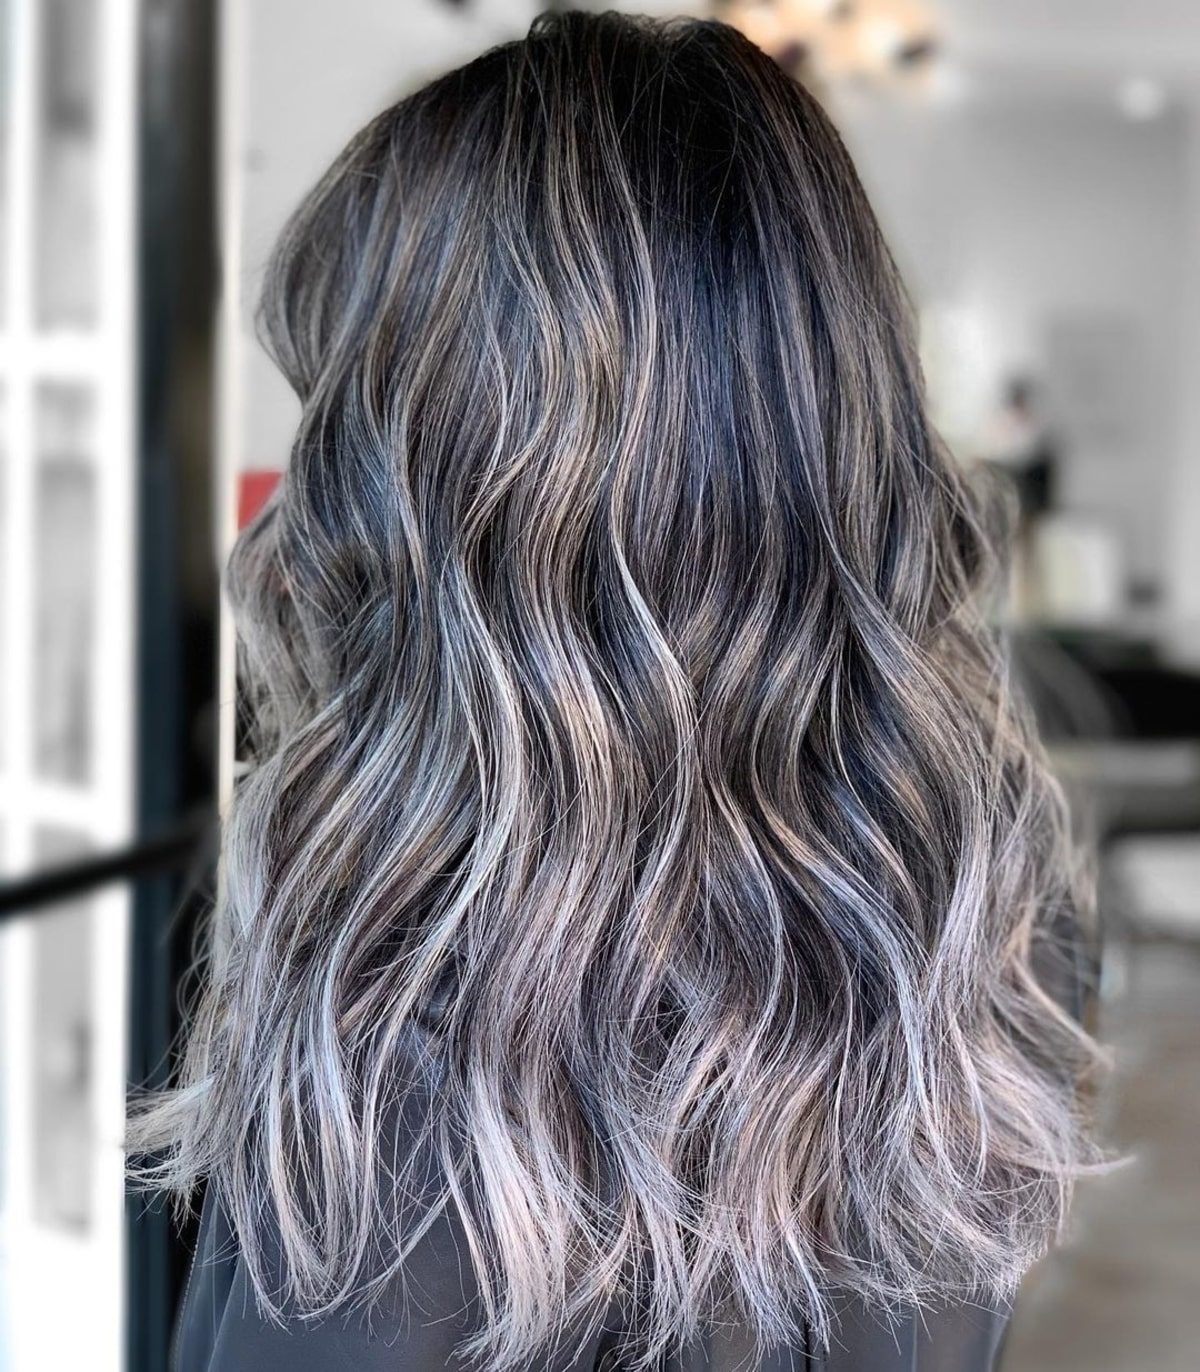 Polished Dark hair with silver highlights